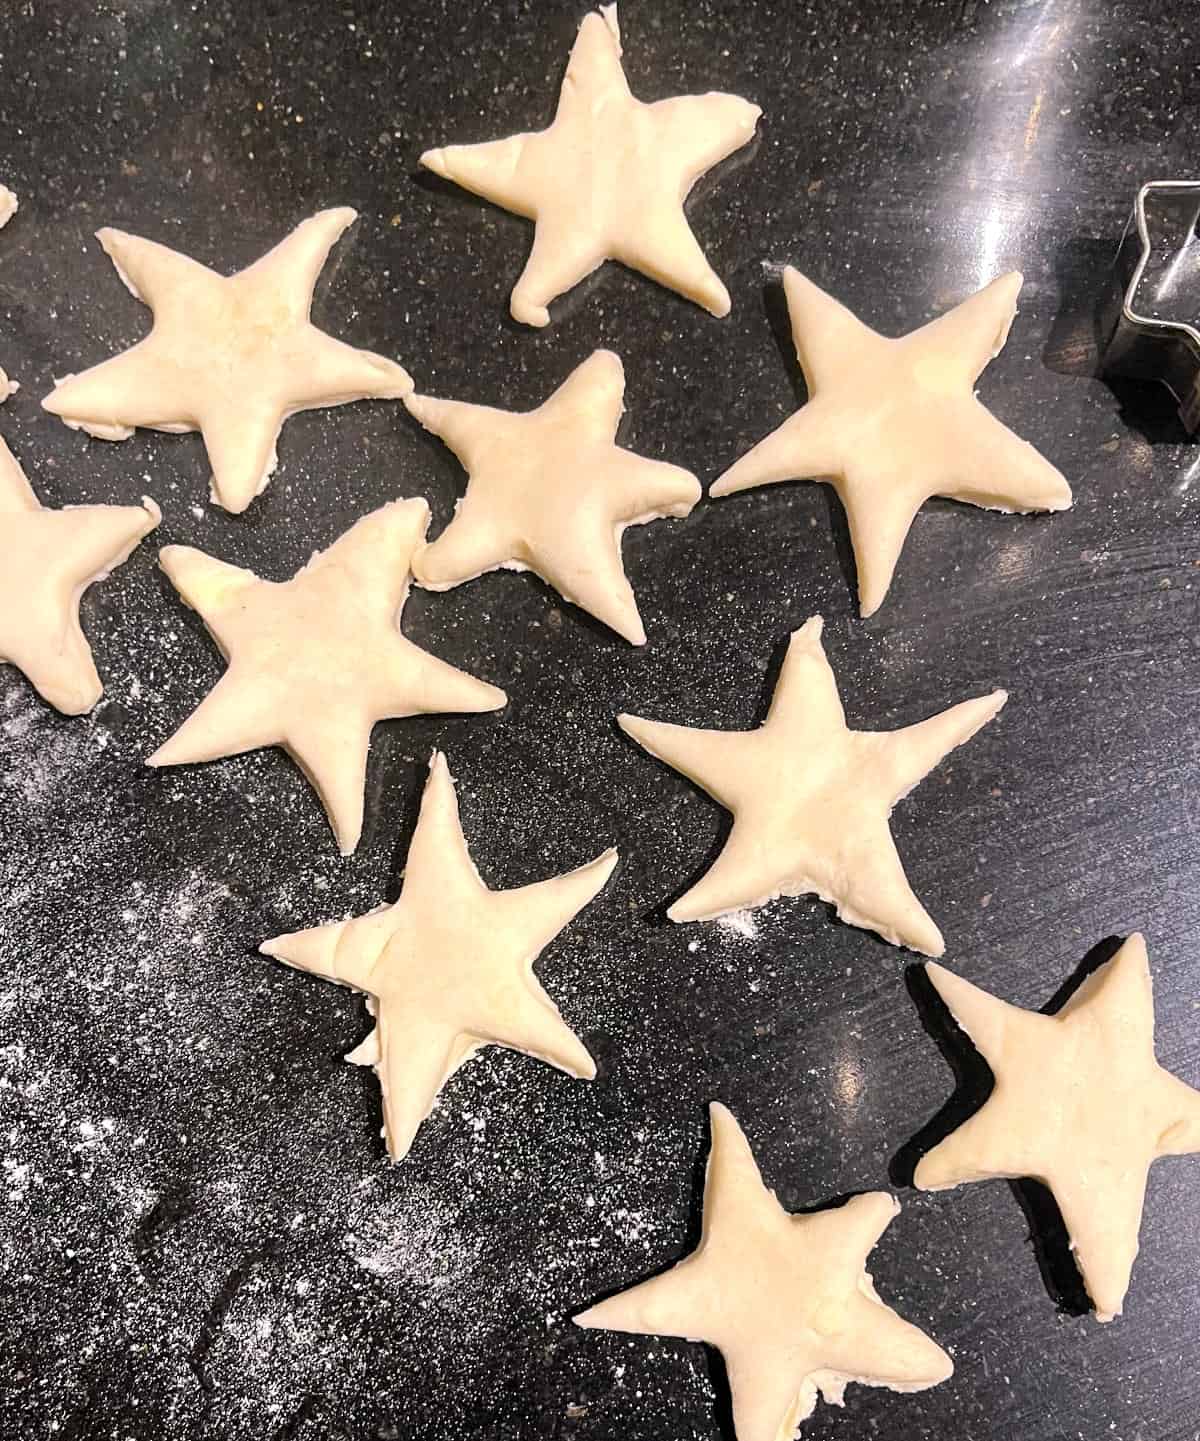 Star shapes cut out of pie dough.